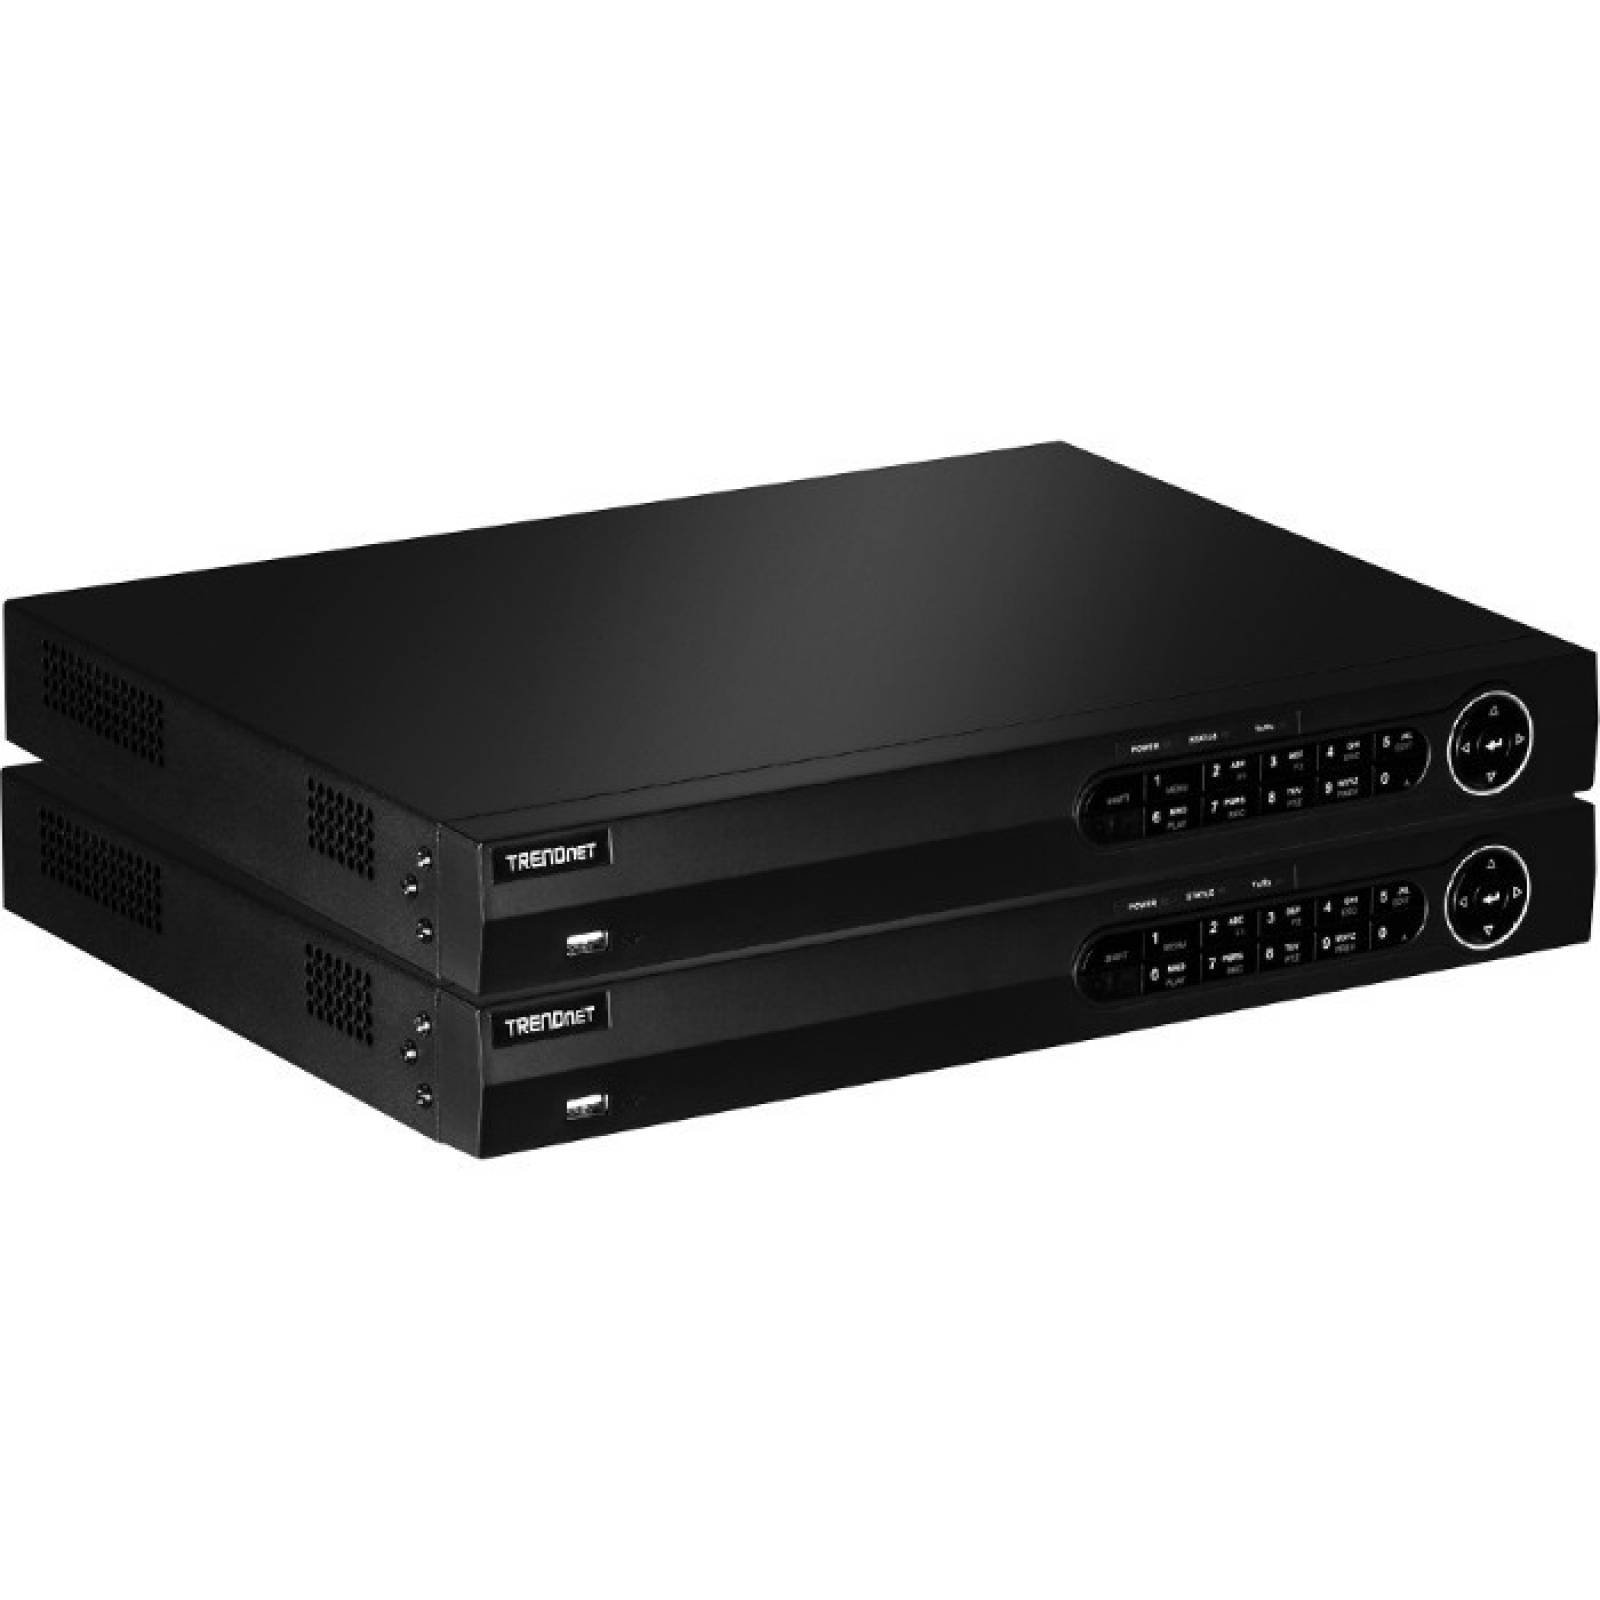 SUPPORTS ONE 4K CAMERA CHANNEL  8CHANNEL H265 1080P HD POE NVR